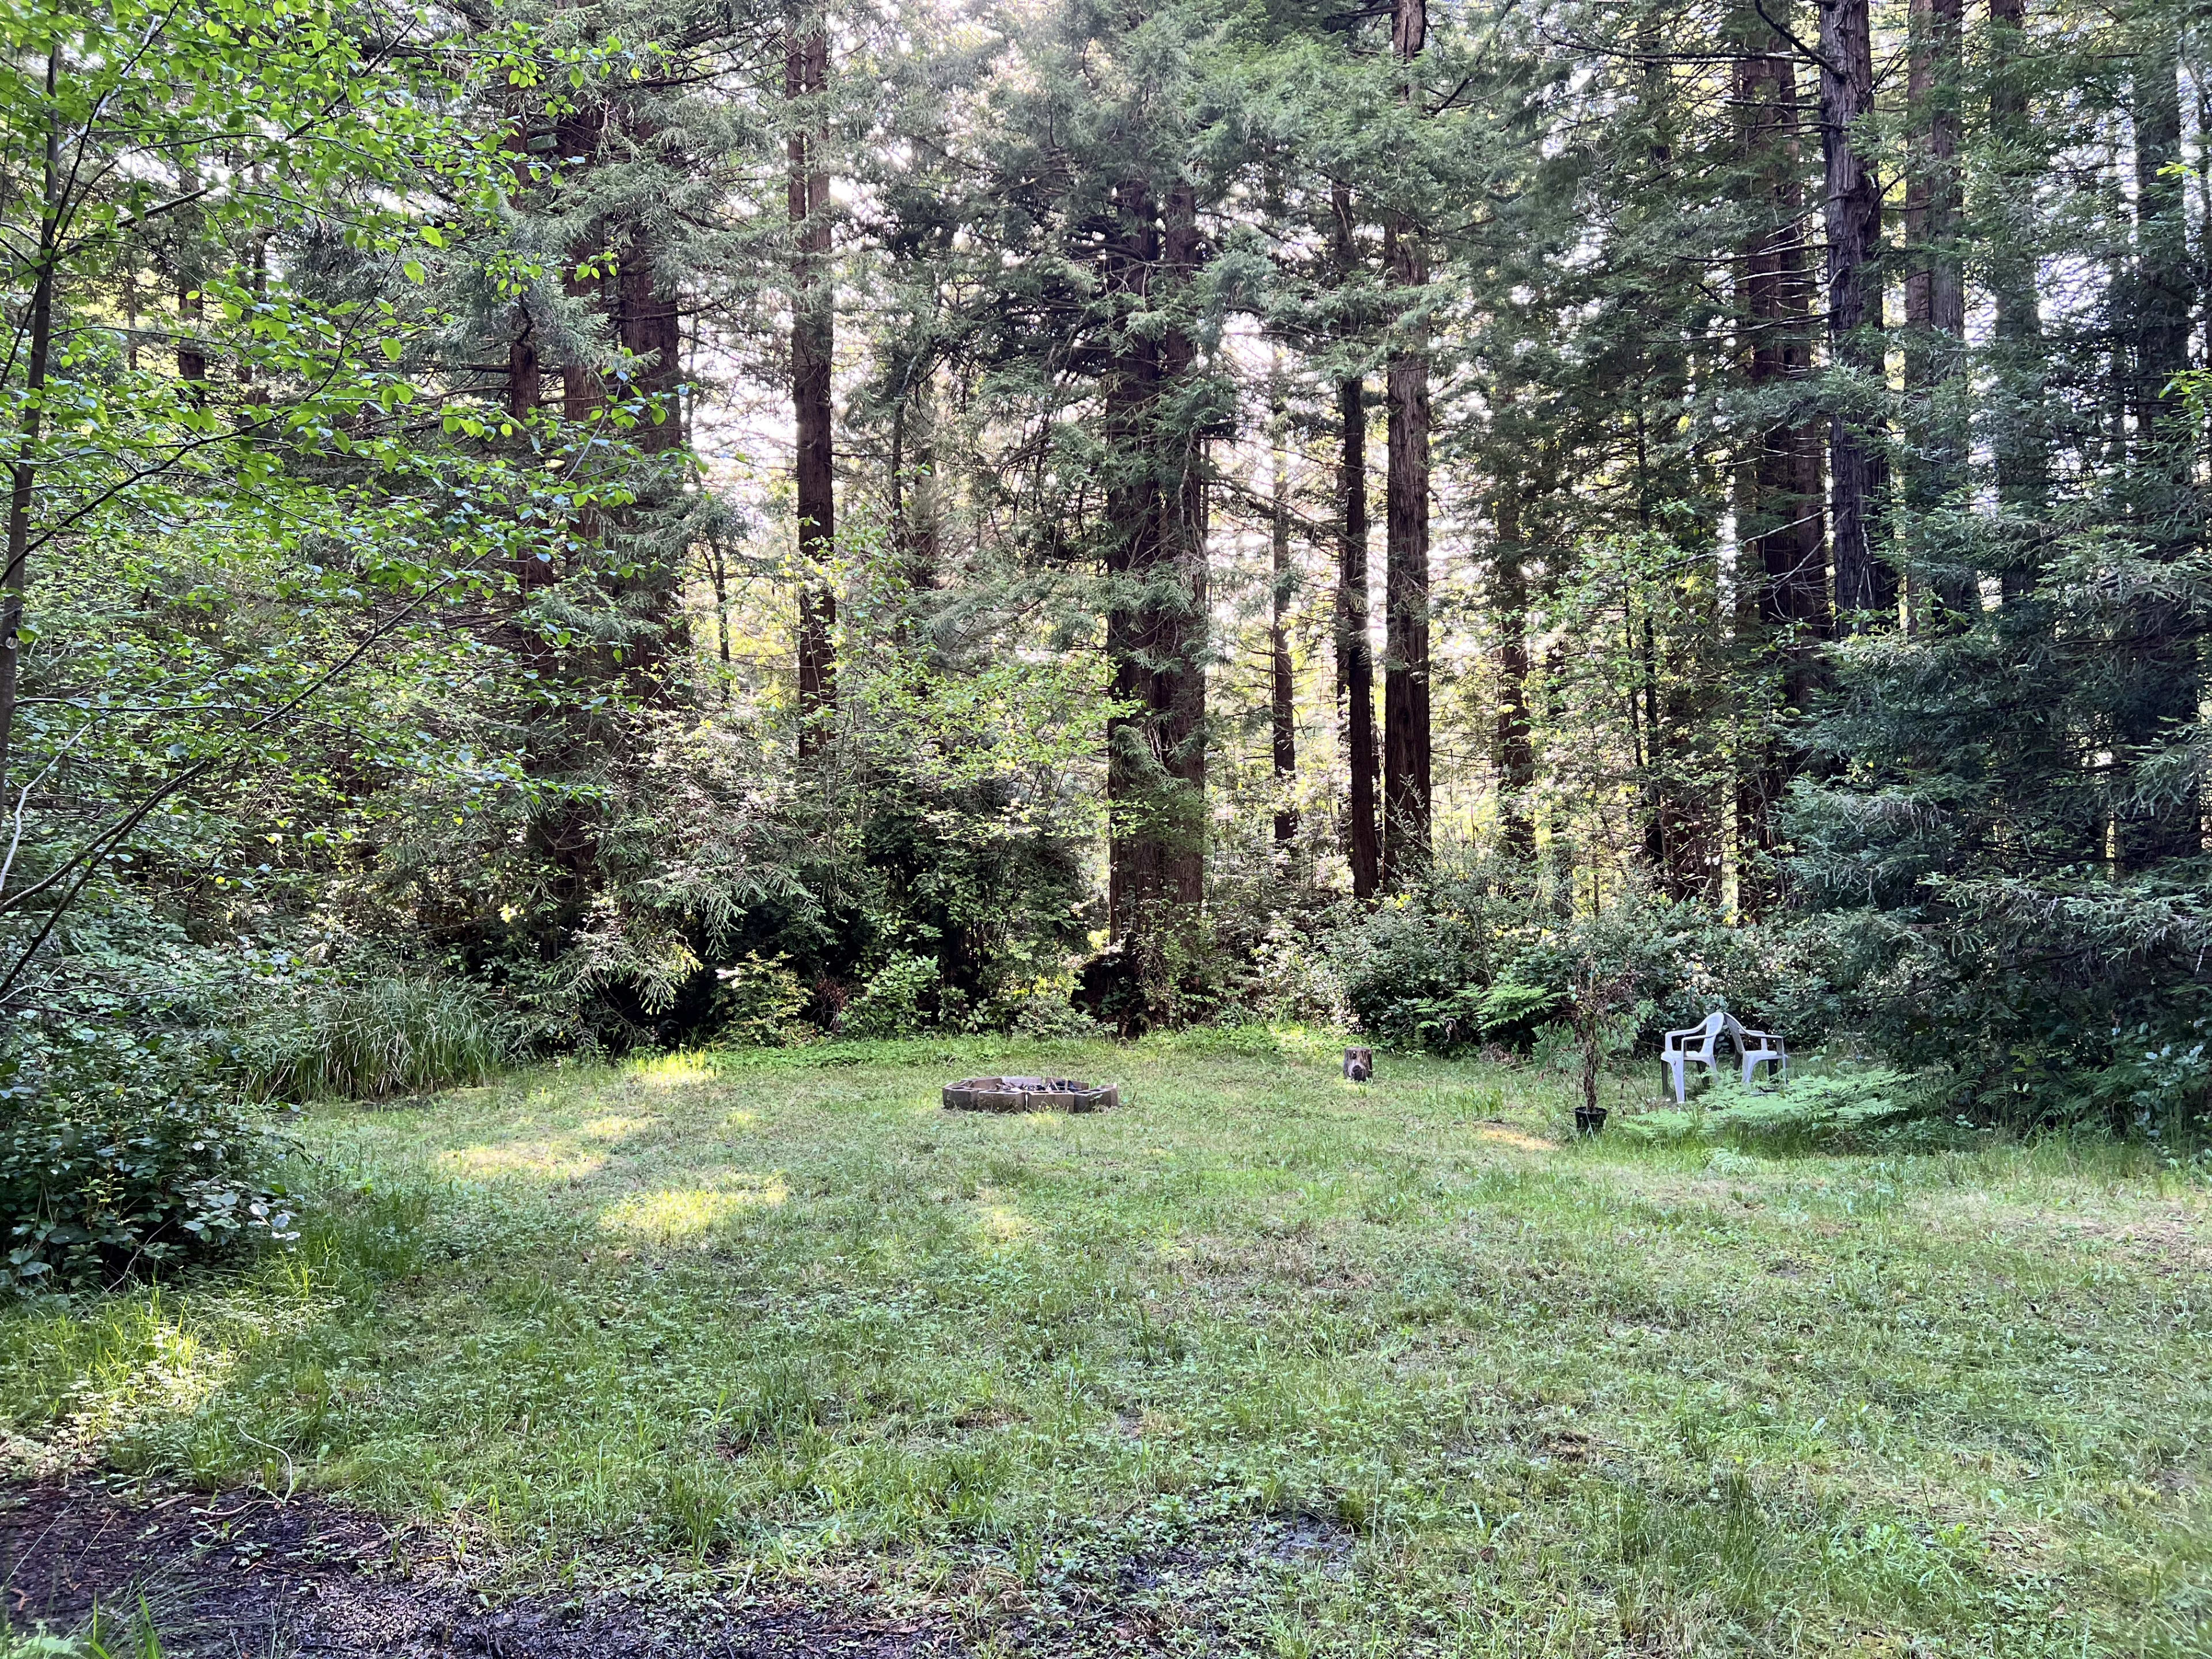 Here's where the fire pit is, and where I would set up my tent if I was camping here. You're surrounded by tall trees in this spot